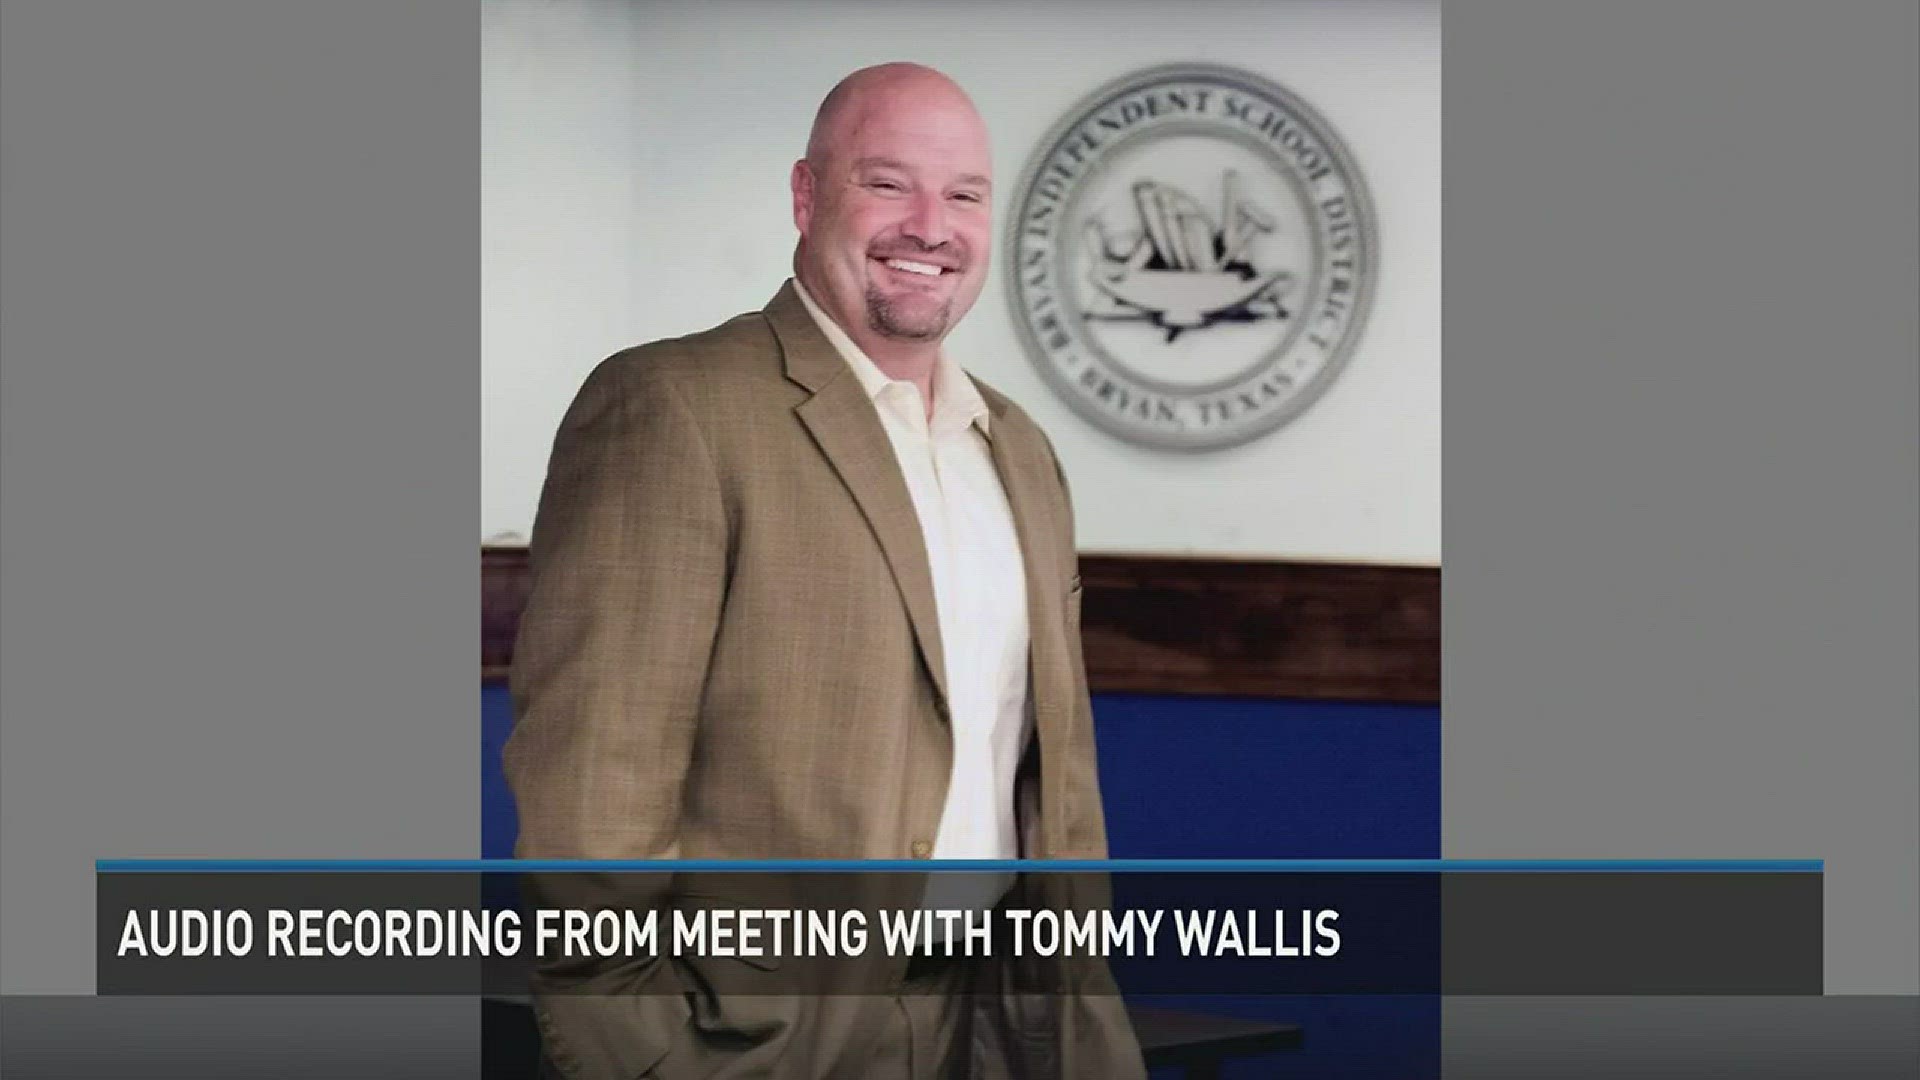 Newly released audio from a meeting in which superintendent Tommy Wallis was asked to resign.